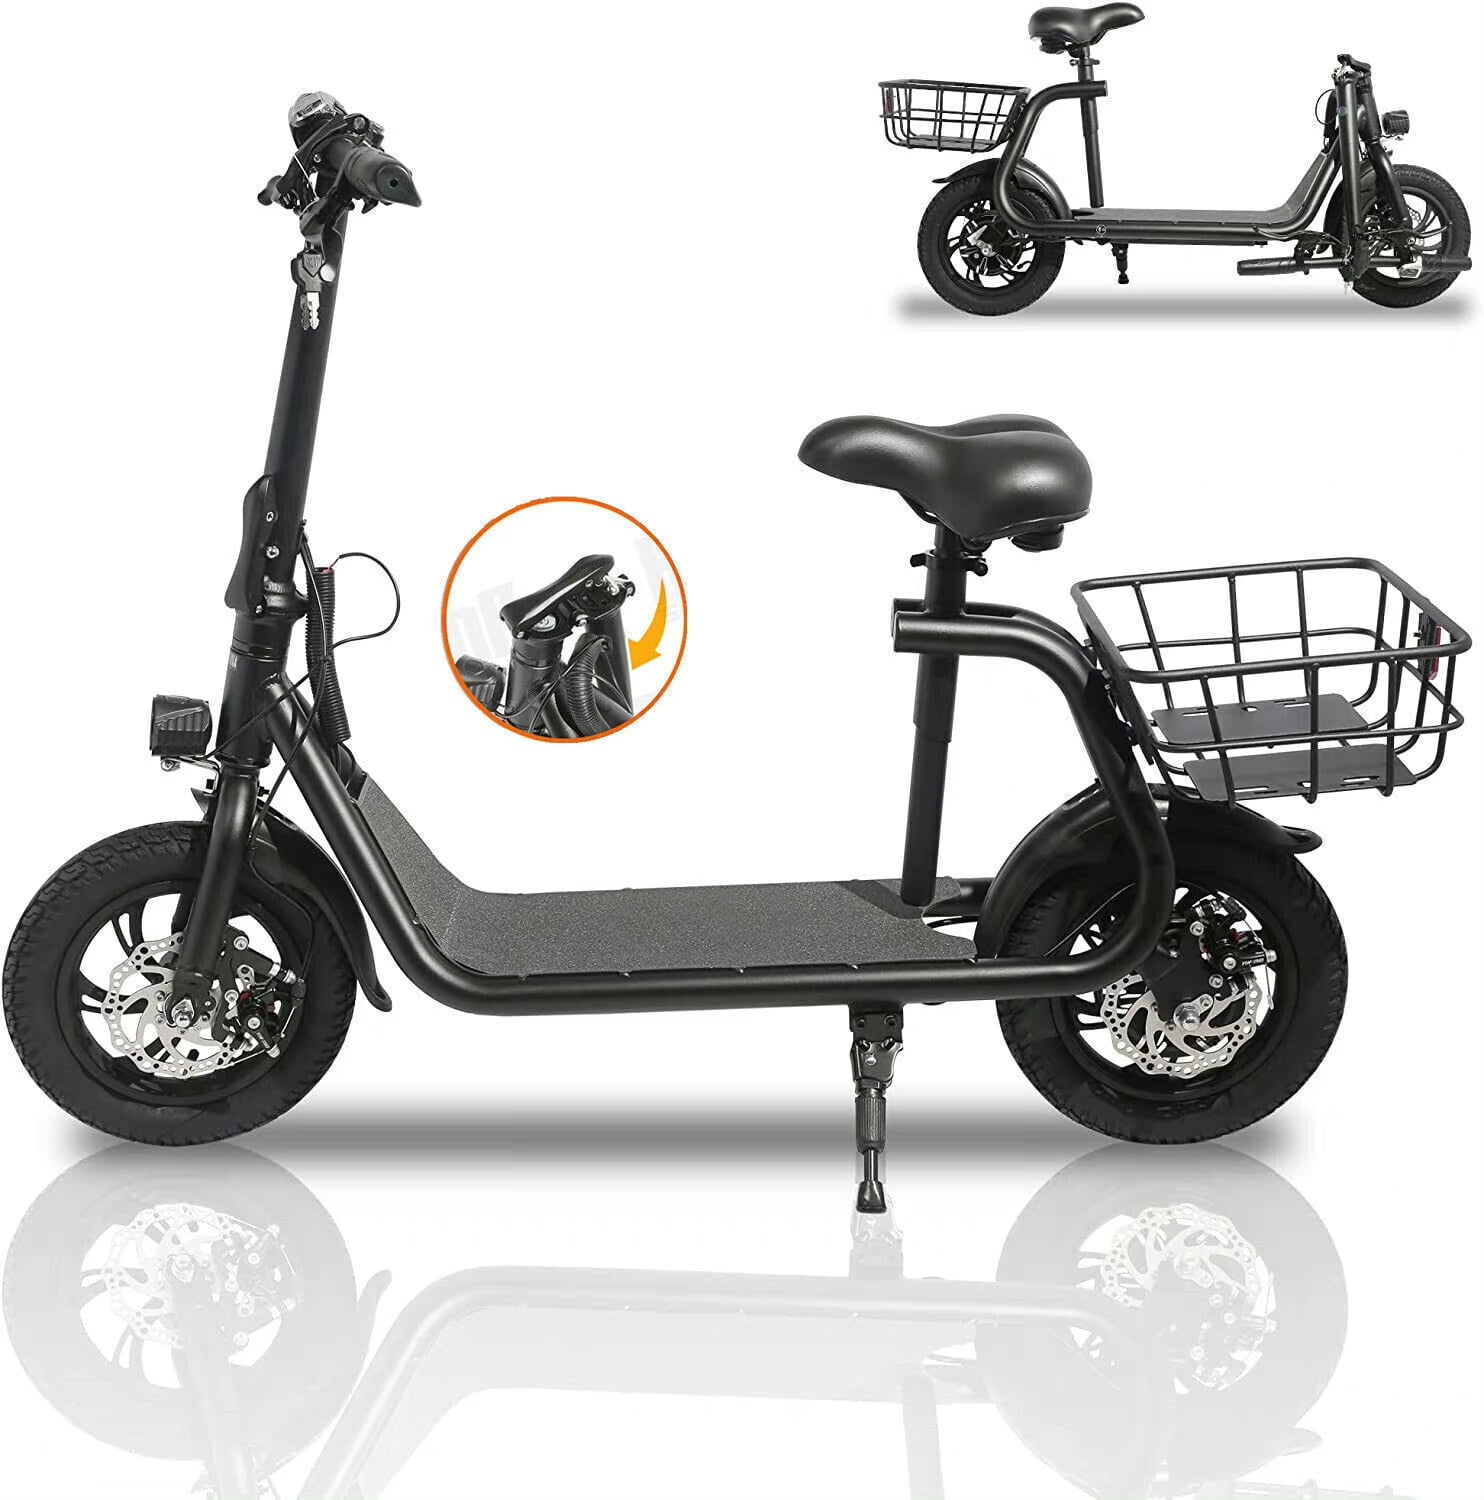 Lohoms 450W 36V Electric Scooters Bike, Adult Electric Moped Commuter Ebike Biycle Waterproof E-Scooter With Seat Basket 12 Off-Road Tires, Walmart.com